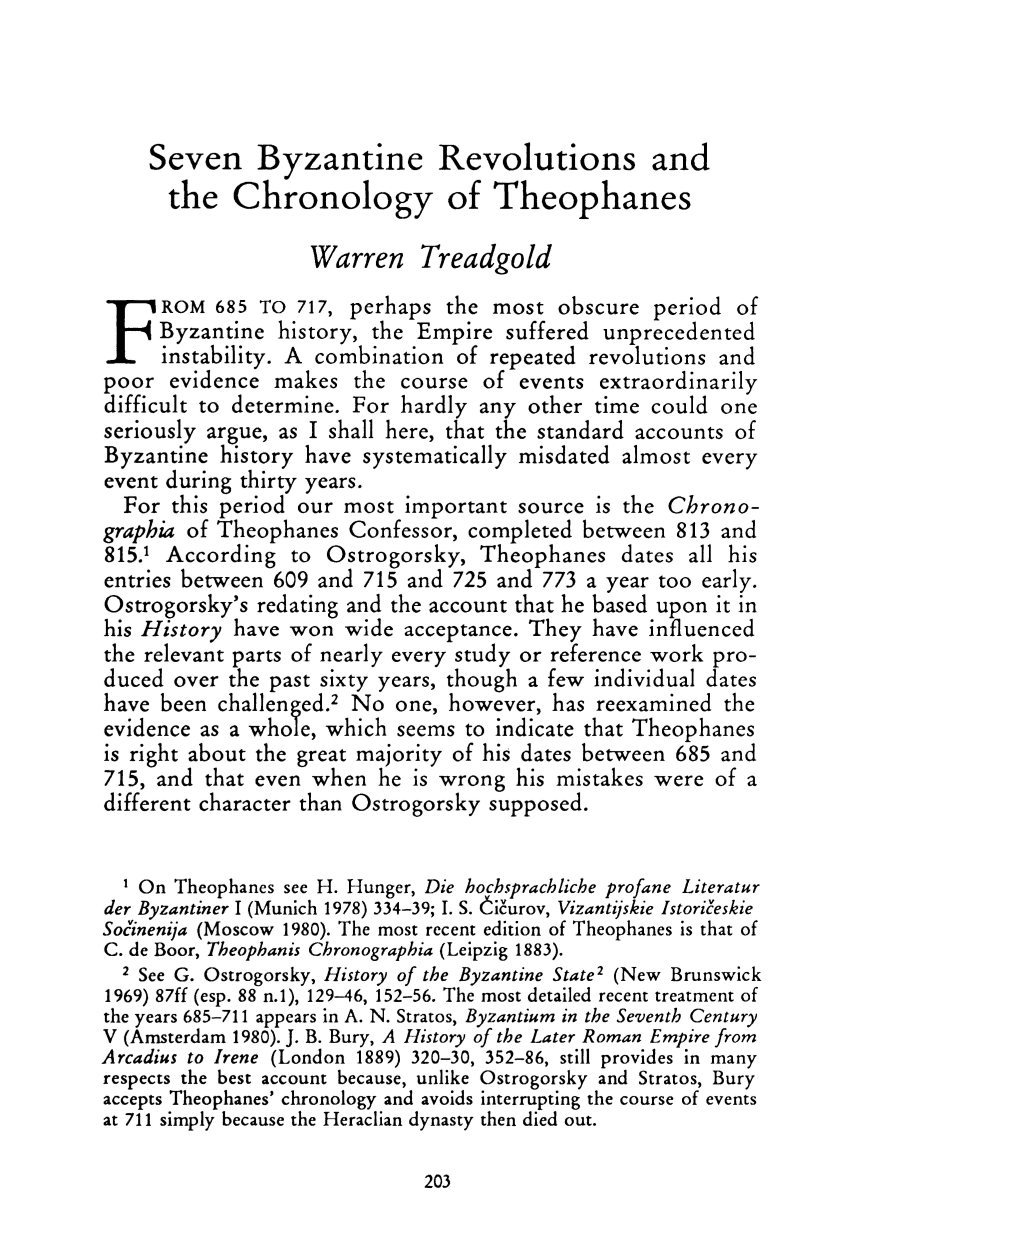 Seven Byzantine Revolutions and the Chronology of Theophanes , Greek, Roman and Byzantine Studies, 31:2 (1990:Summer) P.203